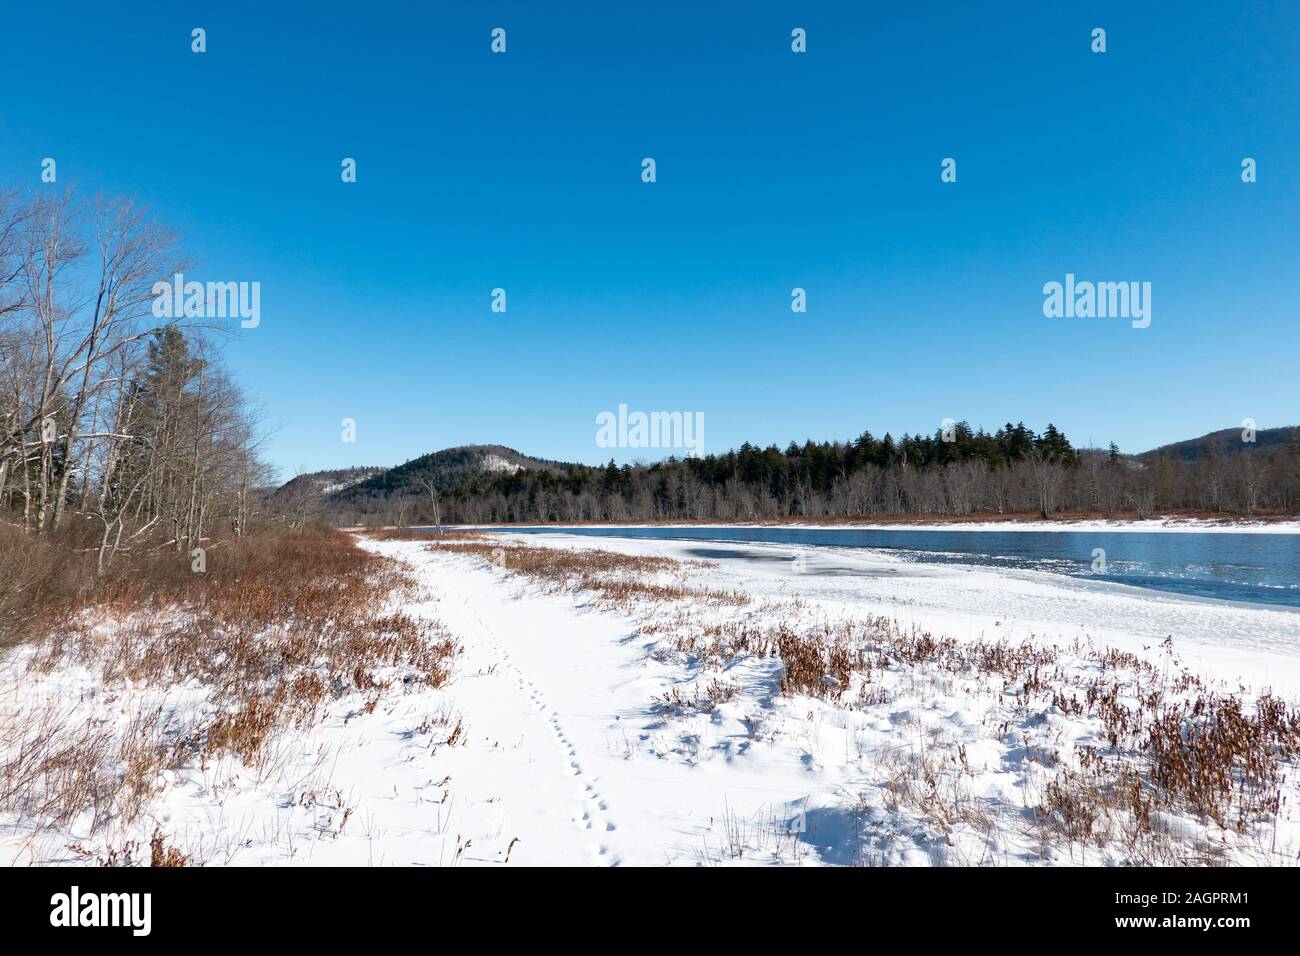 Deer tracks in the snow on a trail along the banks of the Sacandaga River in the Adirondack Mountains, NY USA Stock Photo